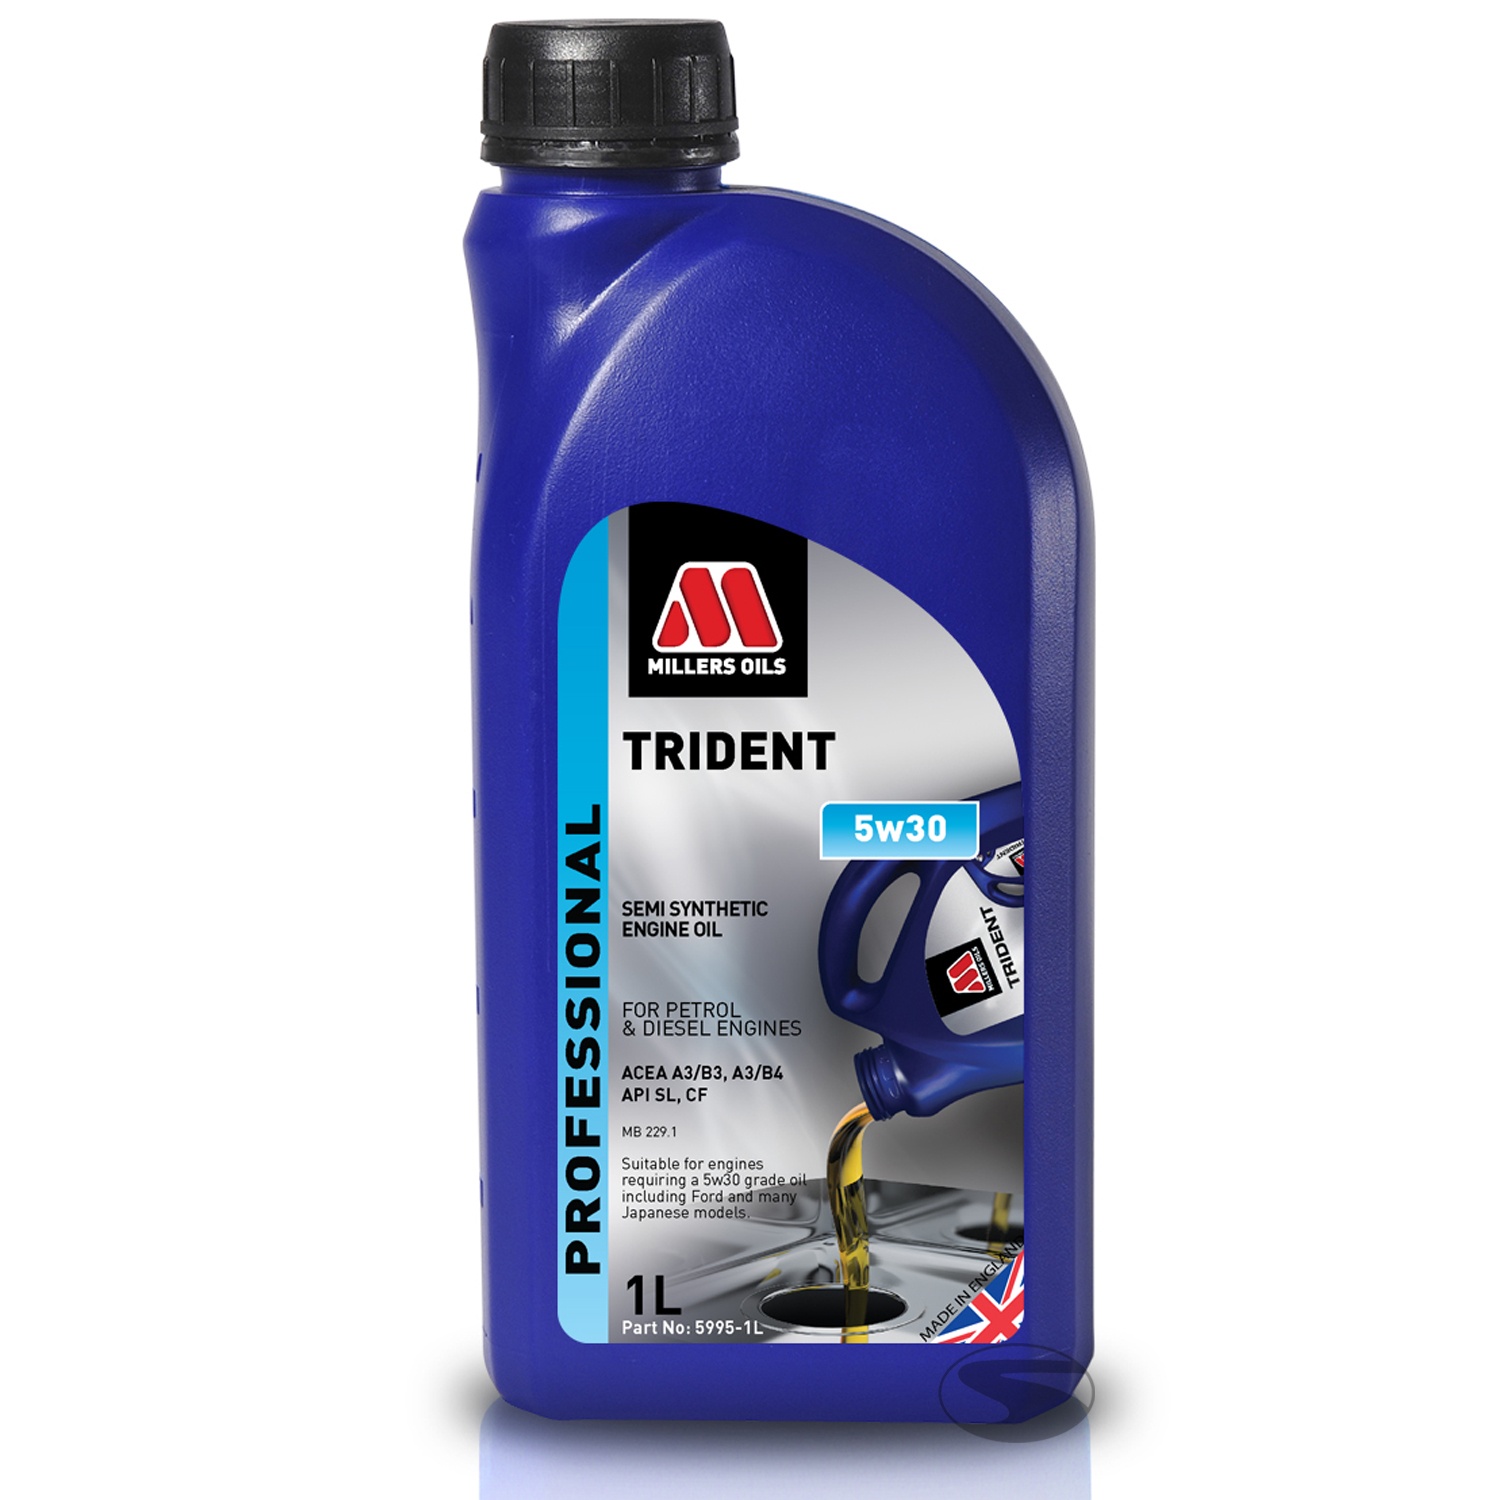 Millers Oils Trident 5W30 Semi Synthetic_1 Liter_150184